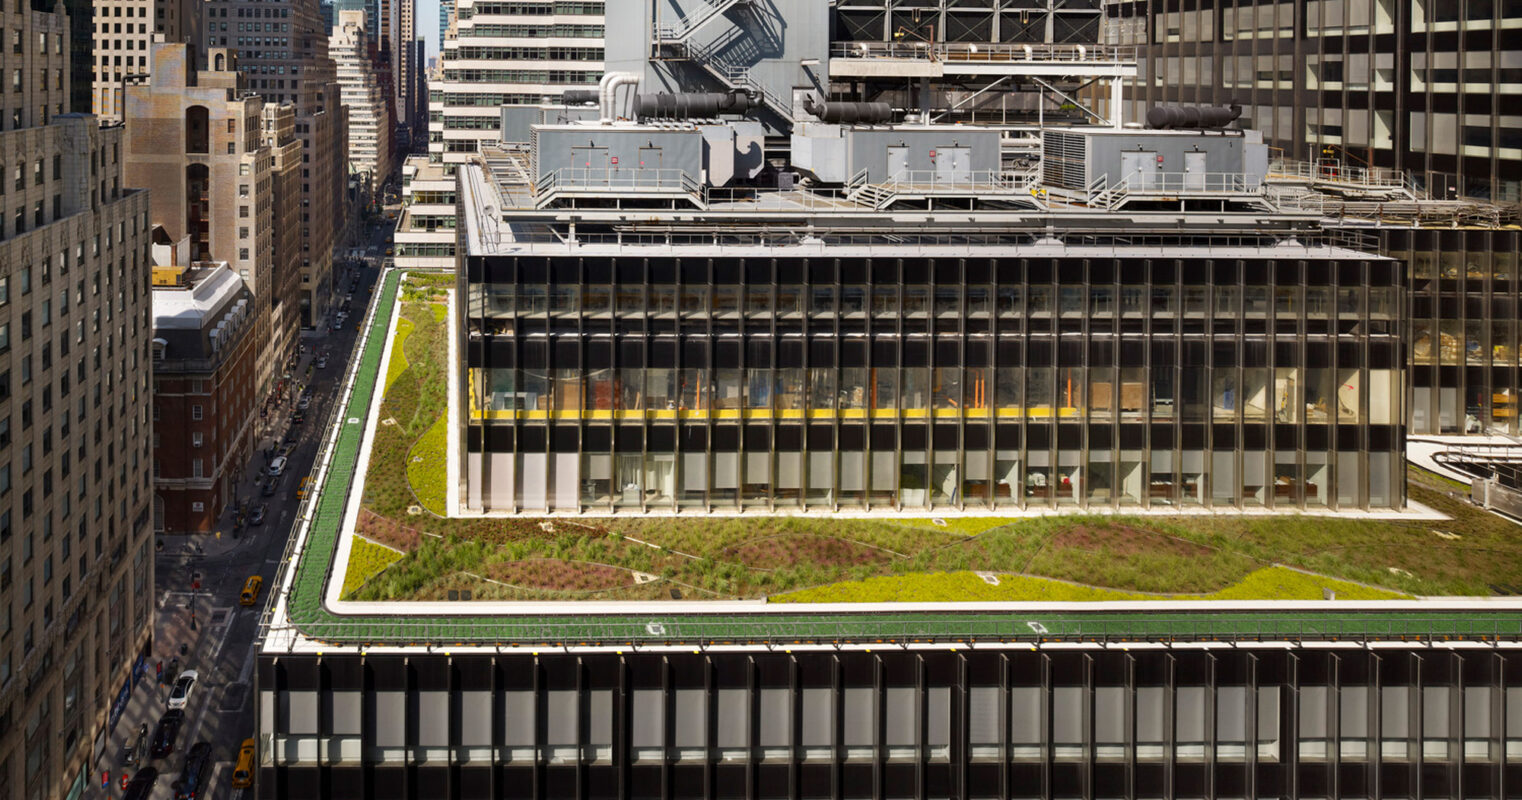 Green rooftop garden on an urban building, integrating sustainable design with a mix of grasses and walkways among modern architecture, offering contrast to the adjacent traditional skyscrapers.